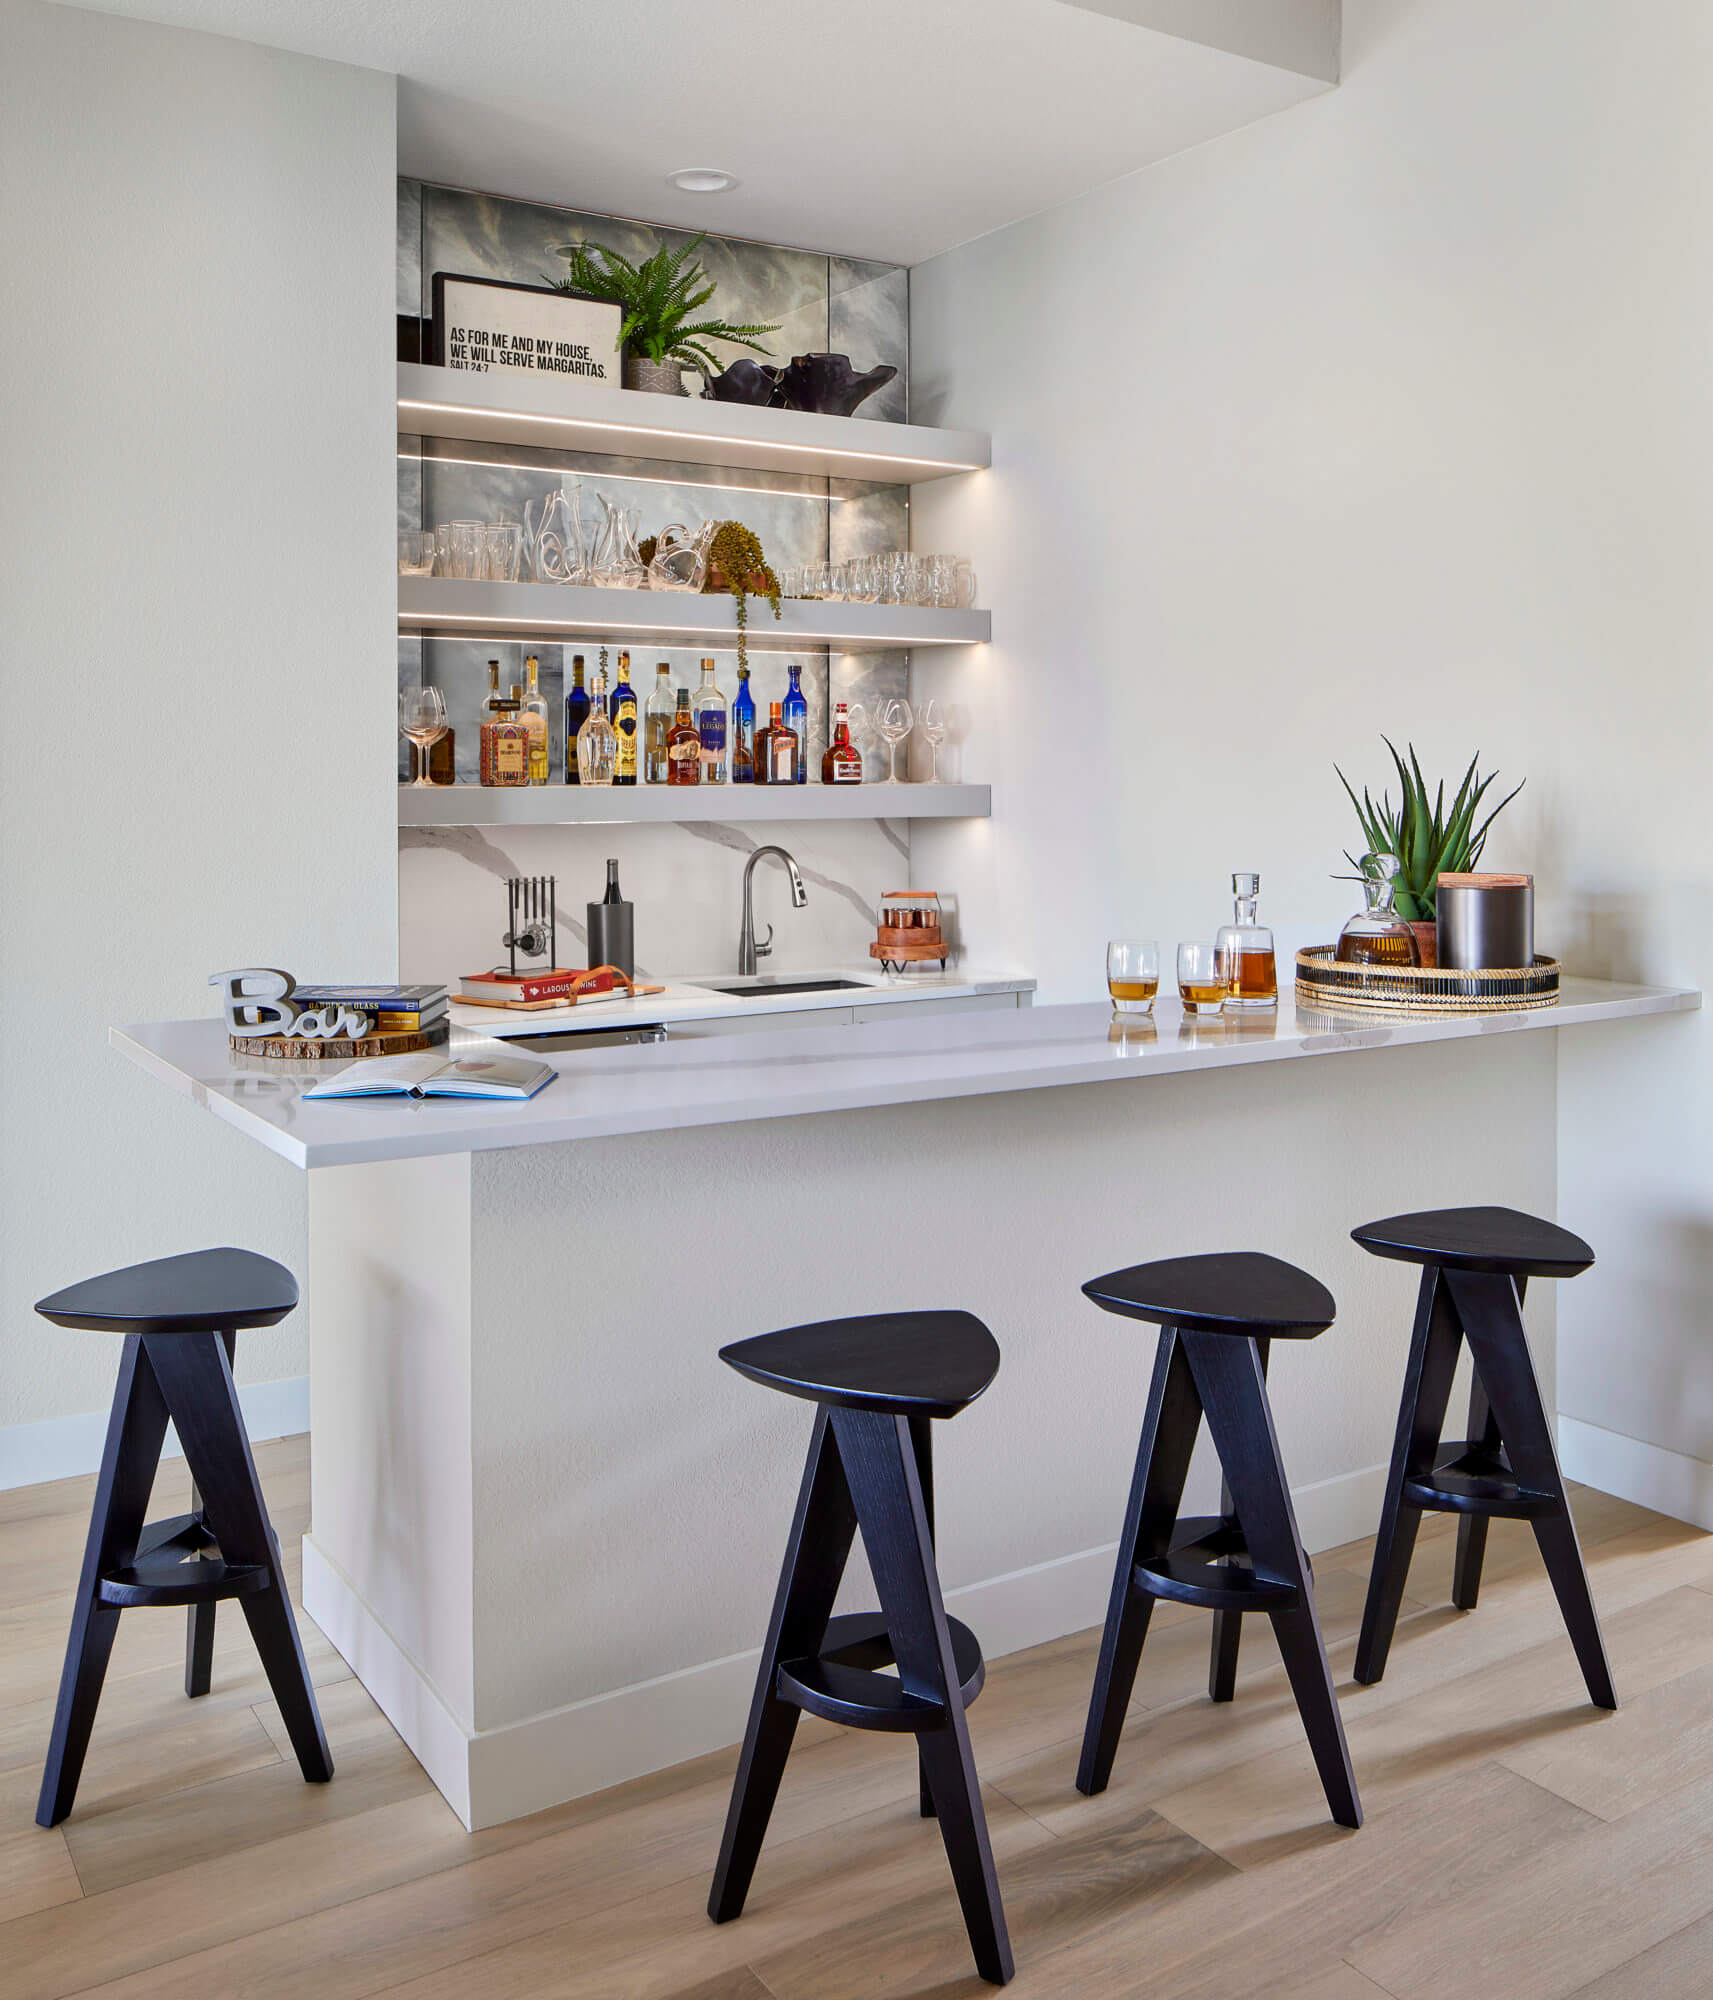 a white kitchen with a bar and stools.